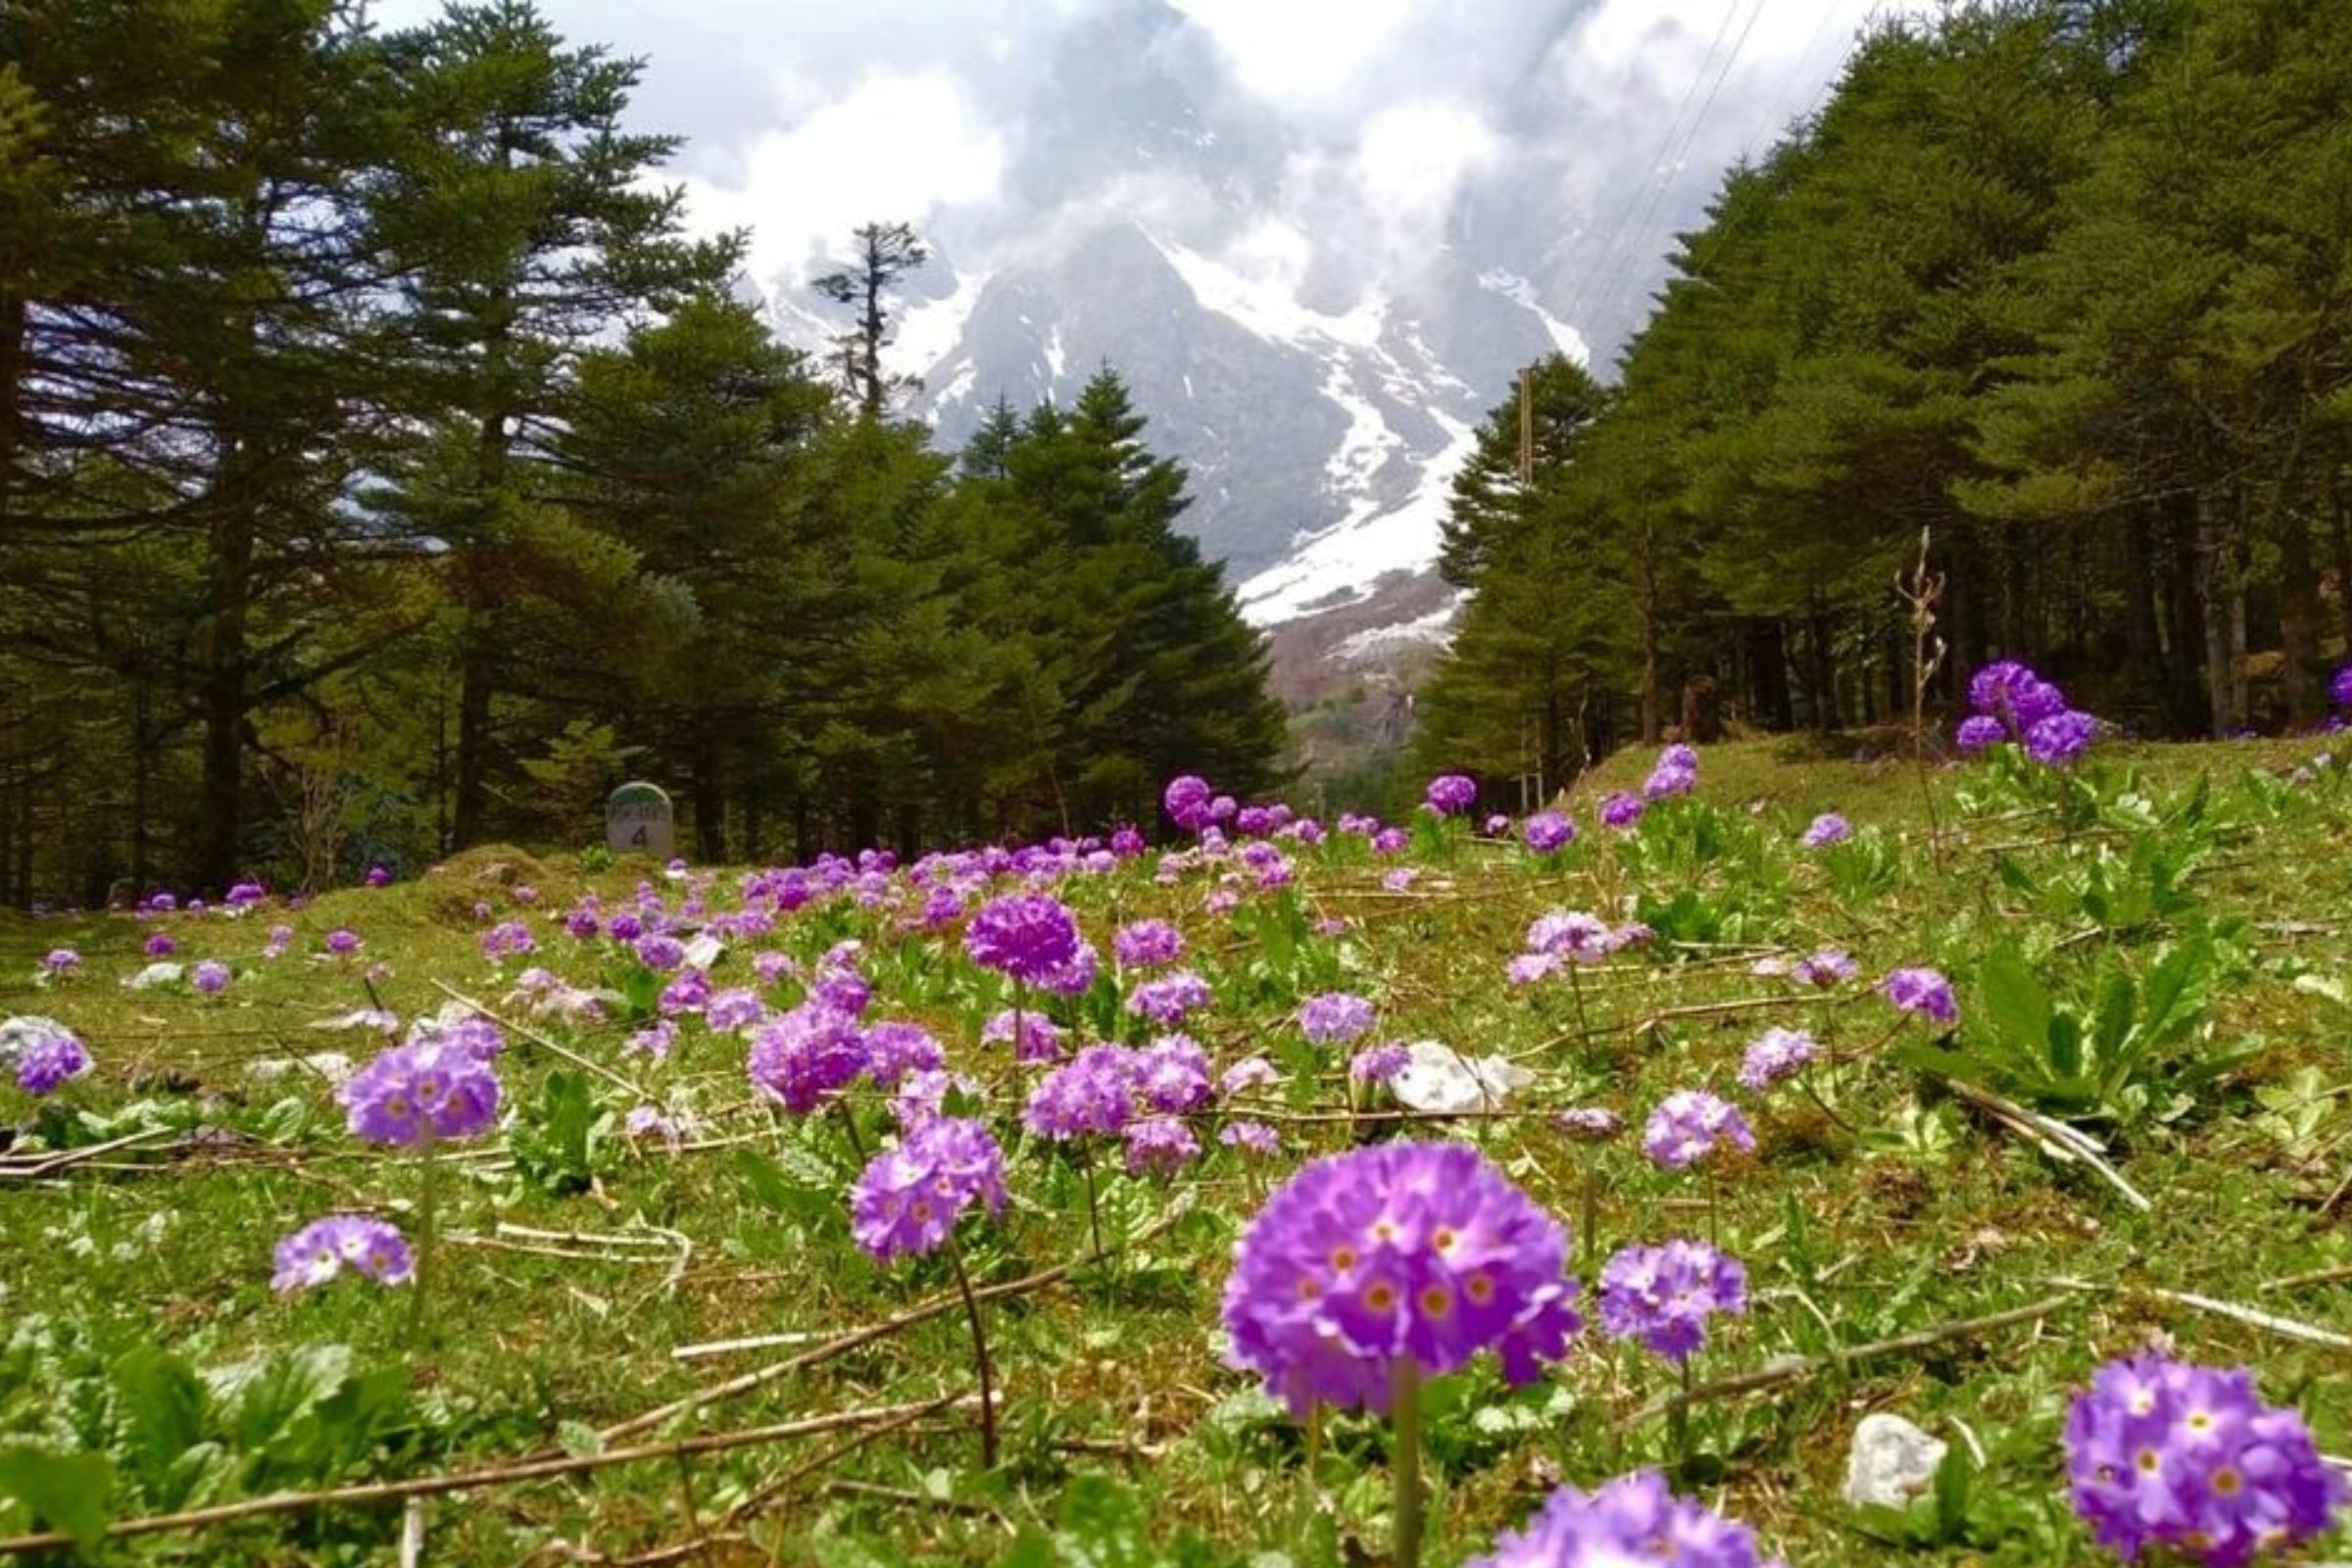 In the foreground of the image, vibrant alpine flowers dominate the scene. A carpet of rhododendrons in various shades of pink, red, and white blankets the ground, interspersed with clusters of yellow and purple primulas. The delicate petals of the flowers catch the sunlight, casting a soft, colorful glow across the landscape.